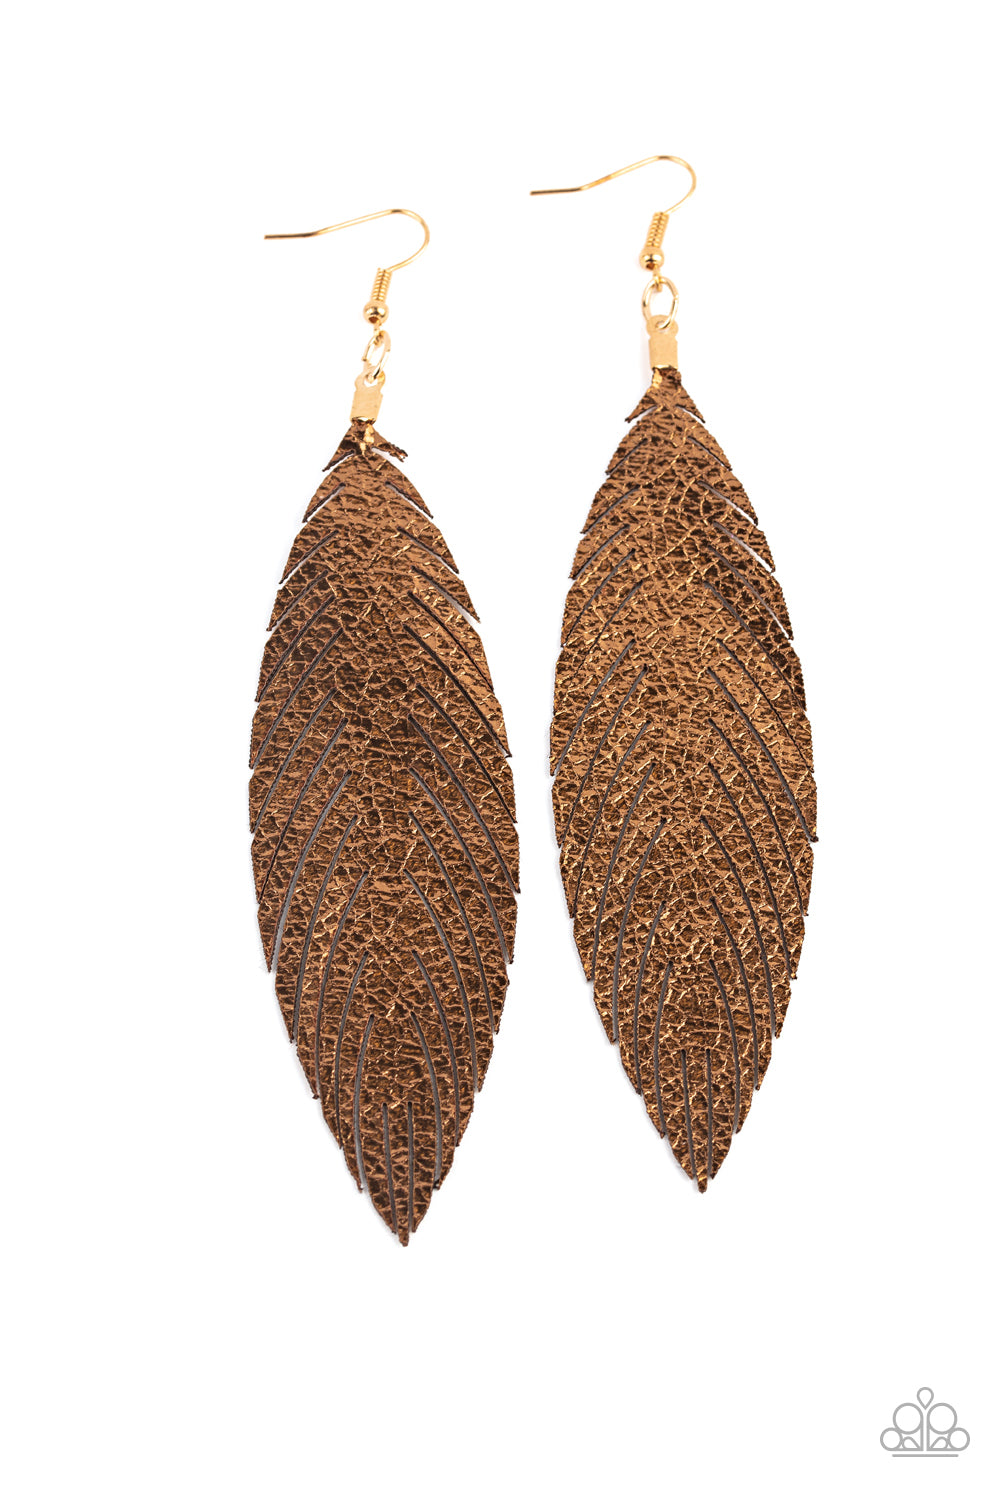 Paparazzi Accessories Feather Fantasy  - Gold Earrings - Lady T Accessories